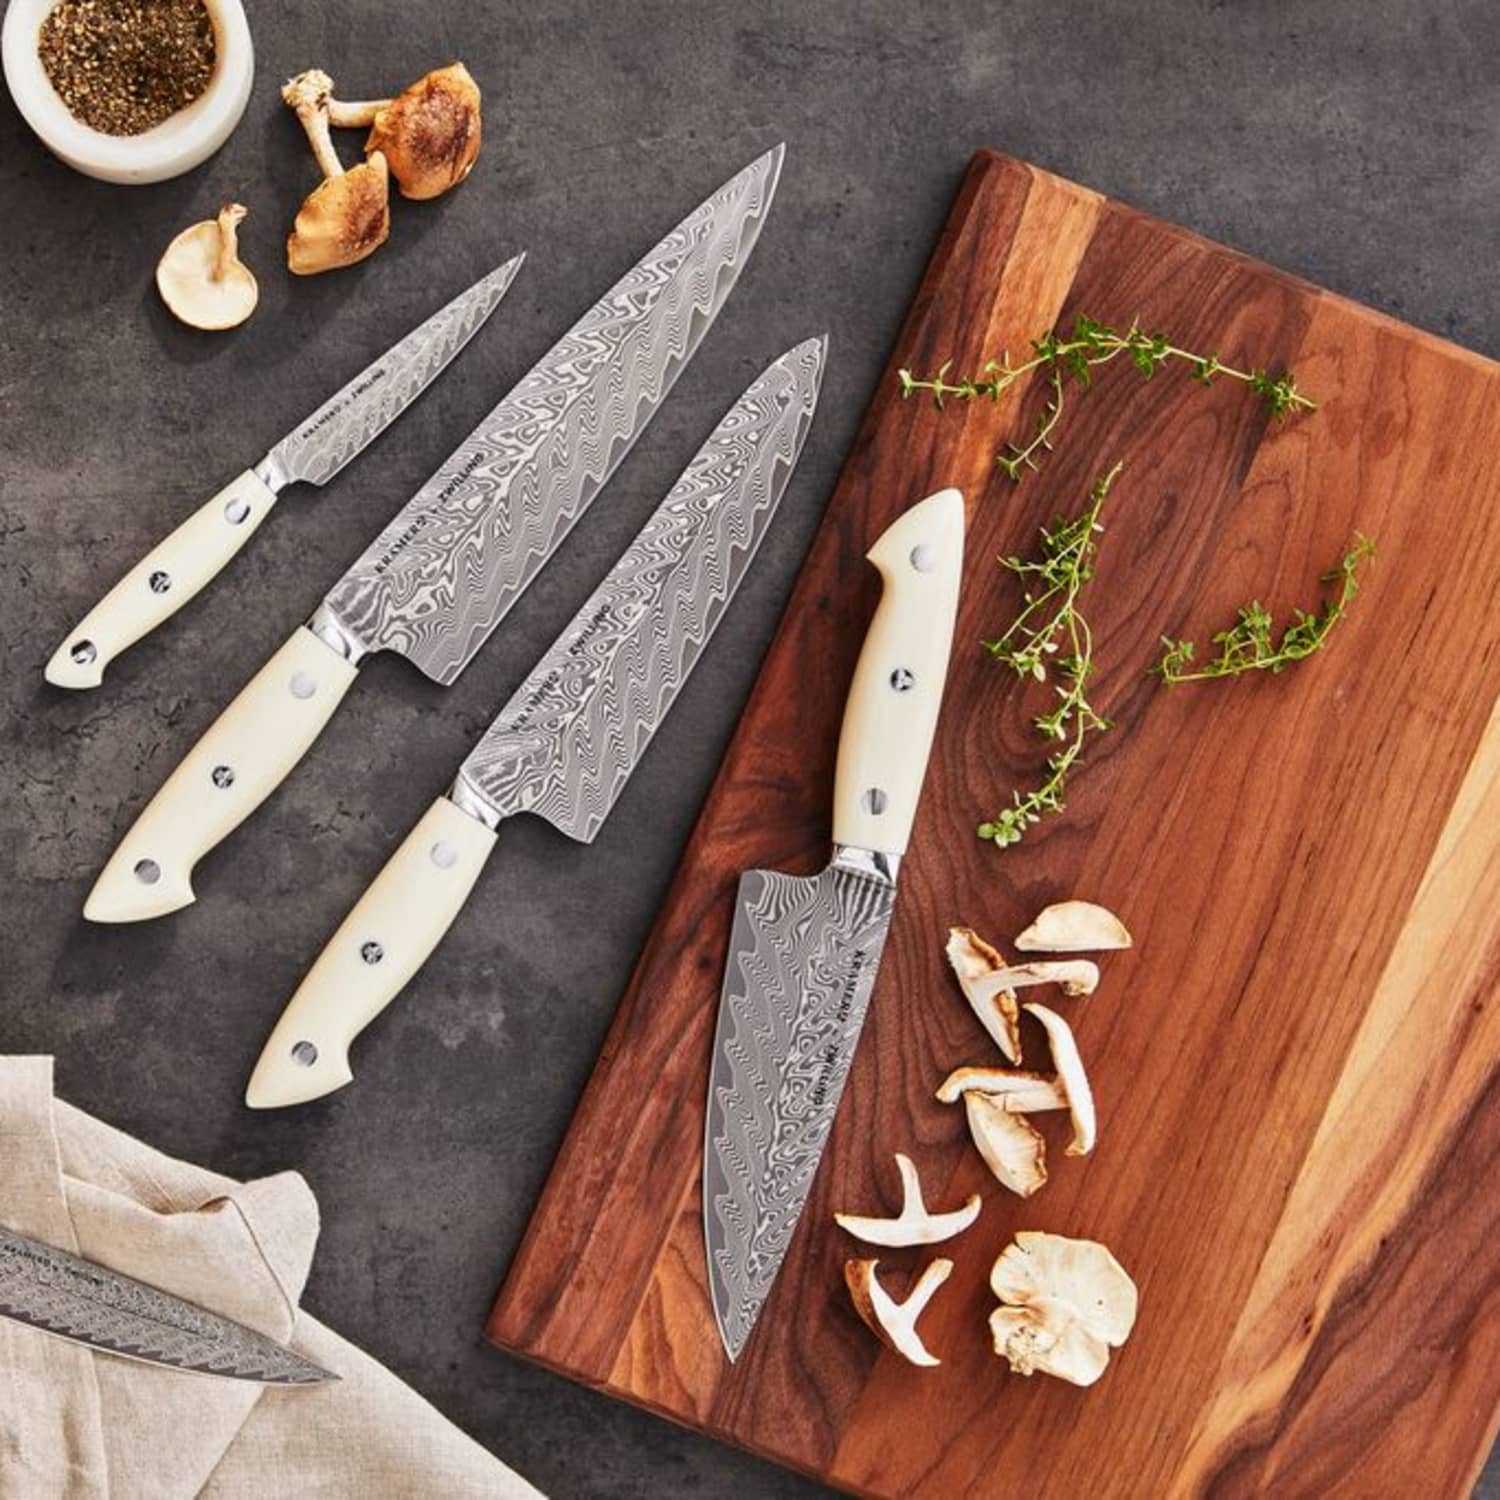 Sur La Table's Newest Knife Collection Is a Chef's Dream The